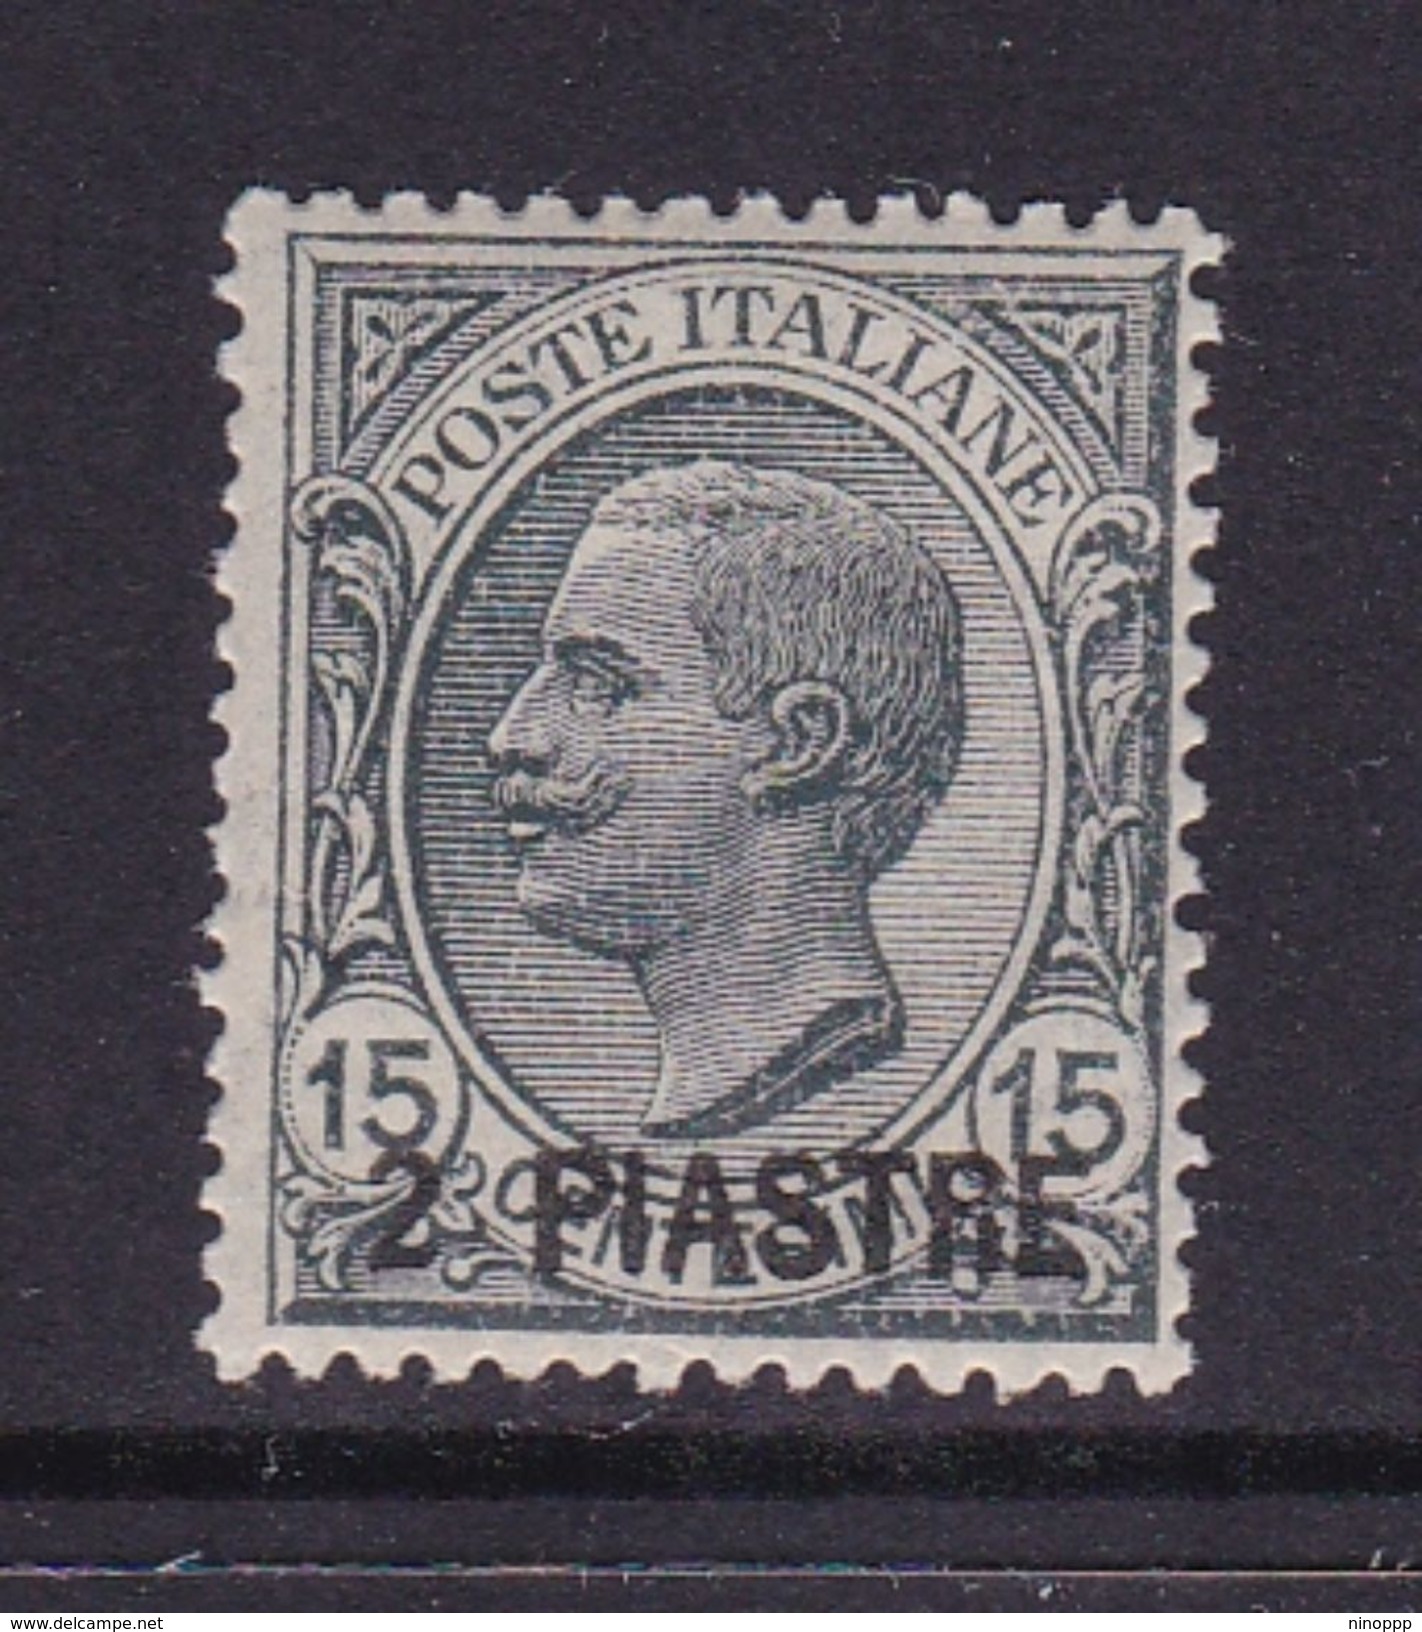 Italy-Italian Offices Abroad-European And Asia Offices-Constantinople S29 1921  2 Piastre On 15c Grey MNH - Europa- Und Asienämter